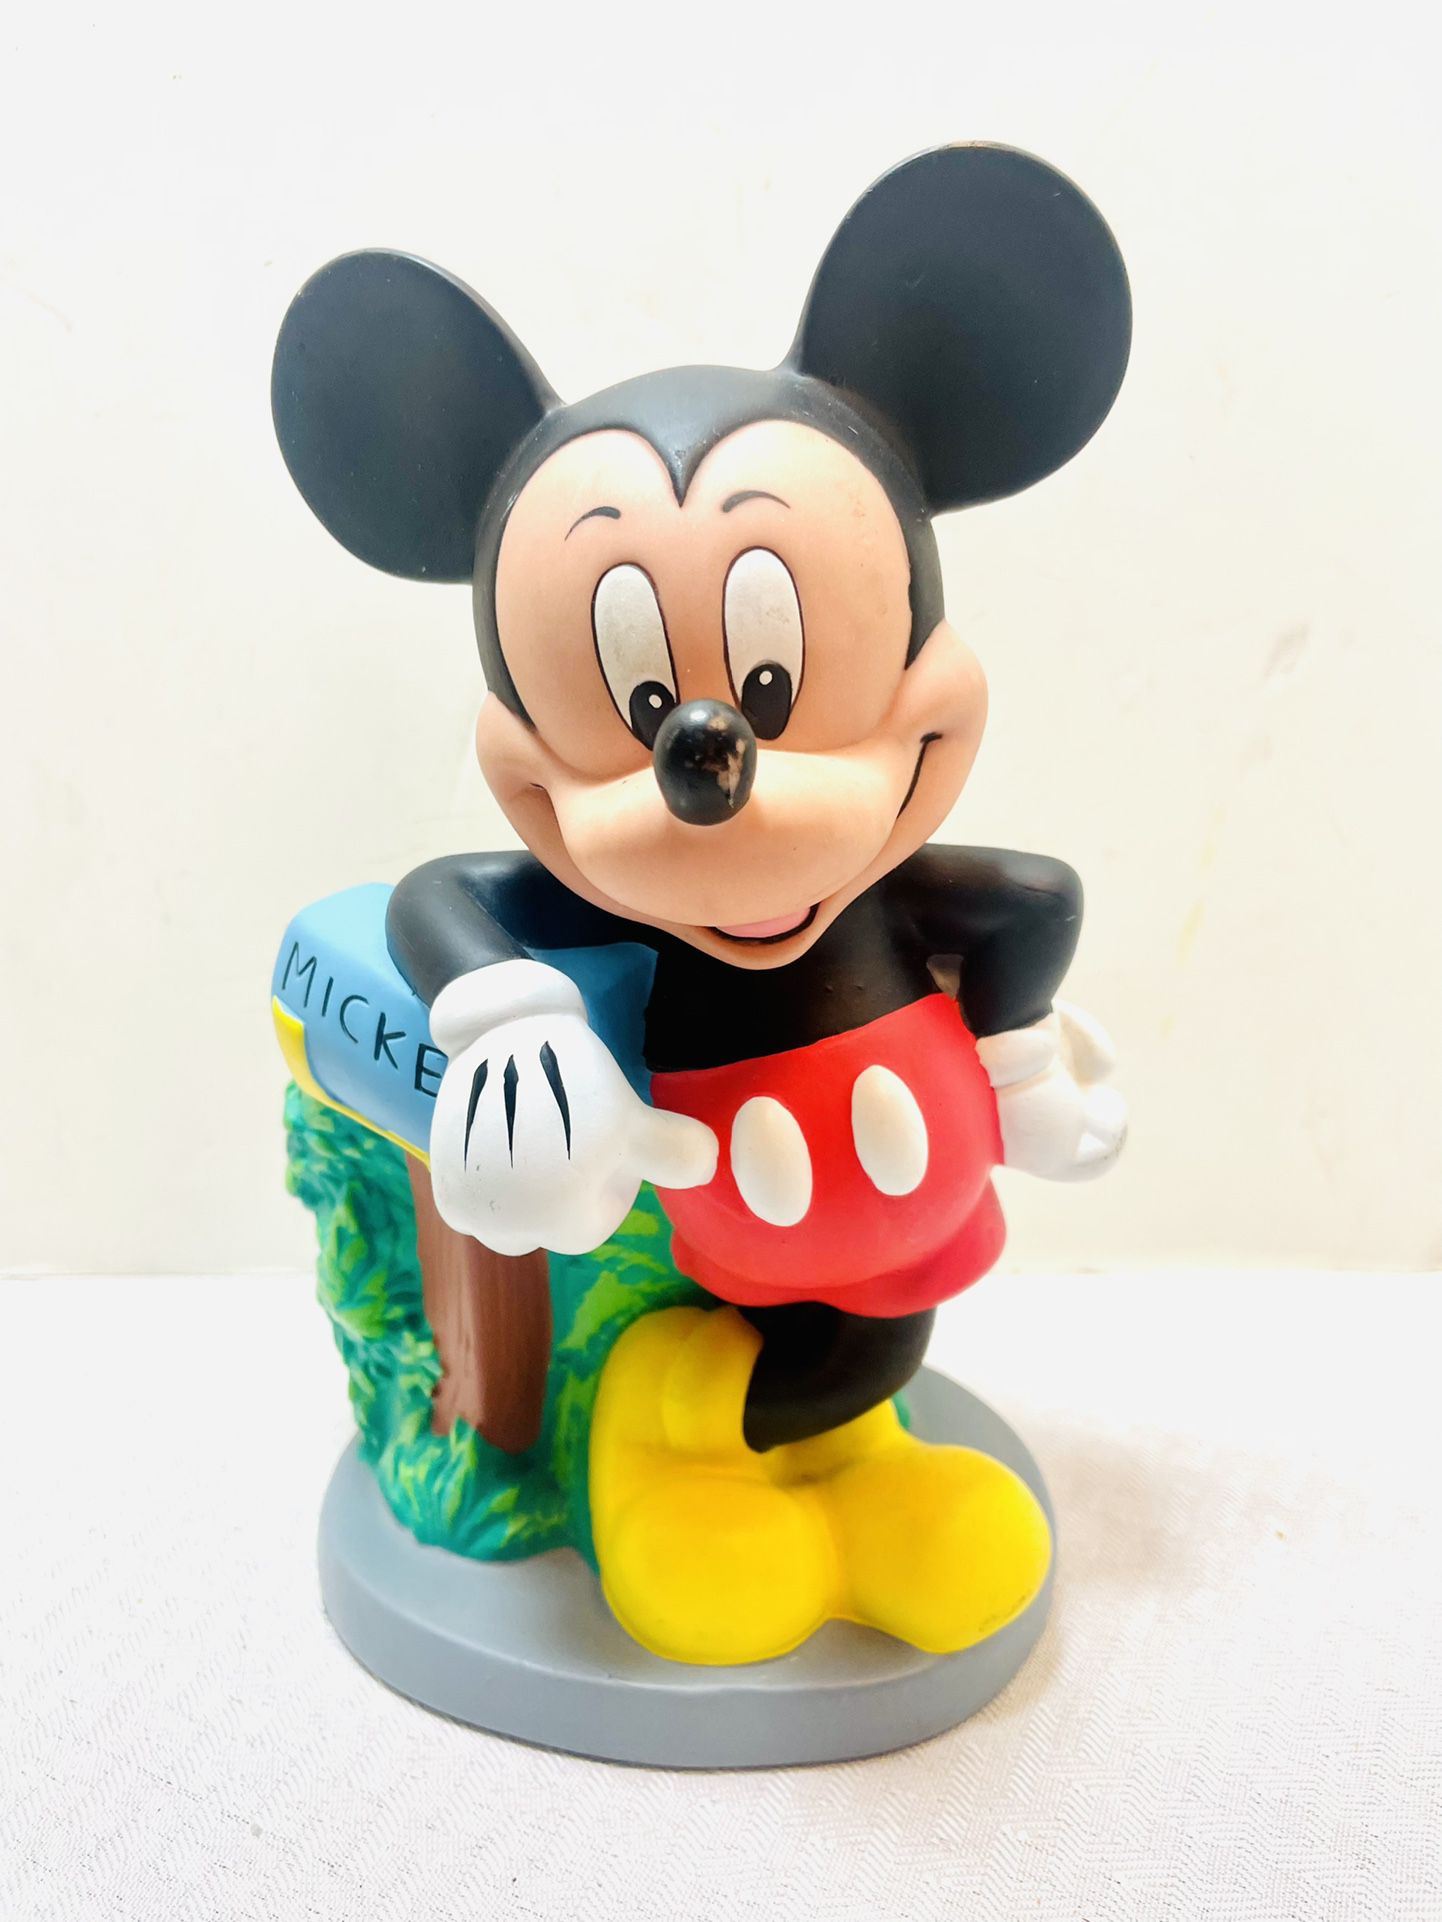 Vintage Disney Mickey Mouse Mailbox Coin Bank Figurine 